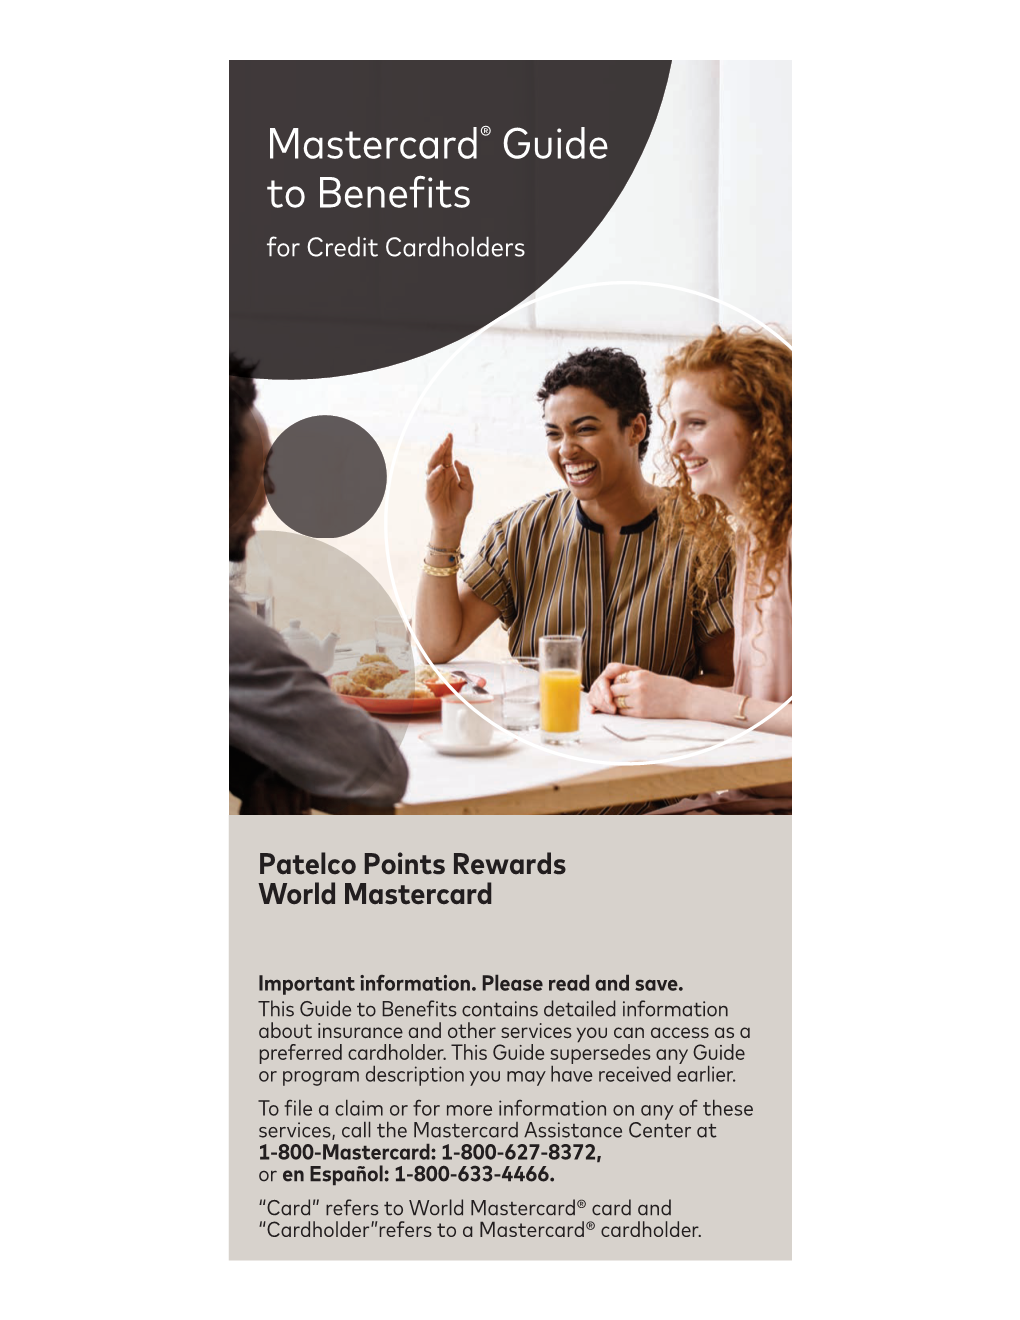 Patelco Points Rewards World Mastercard Credit Card Guide